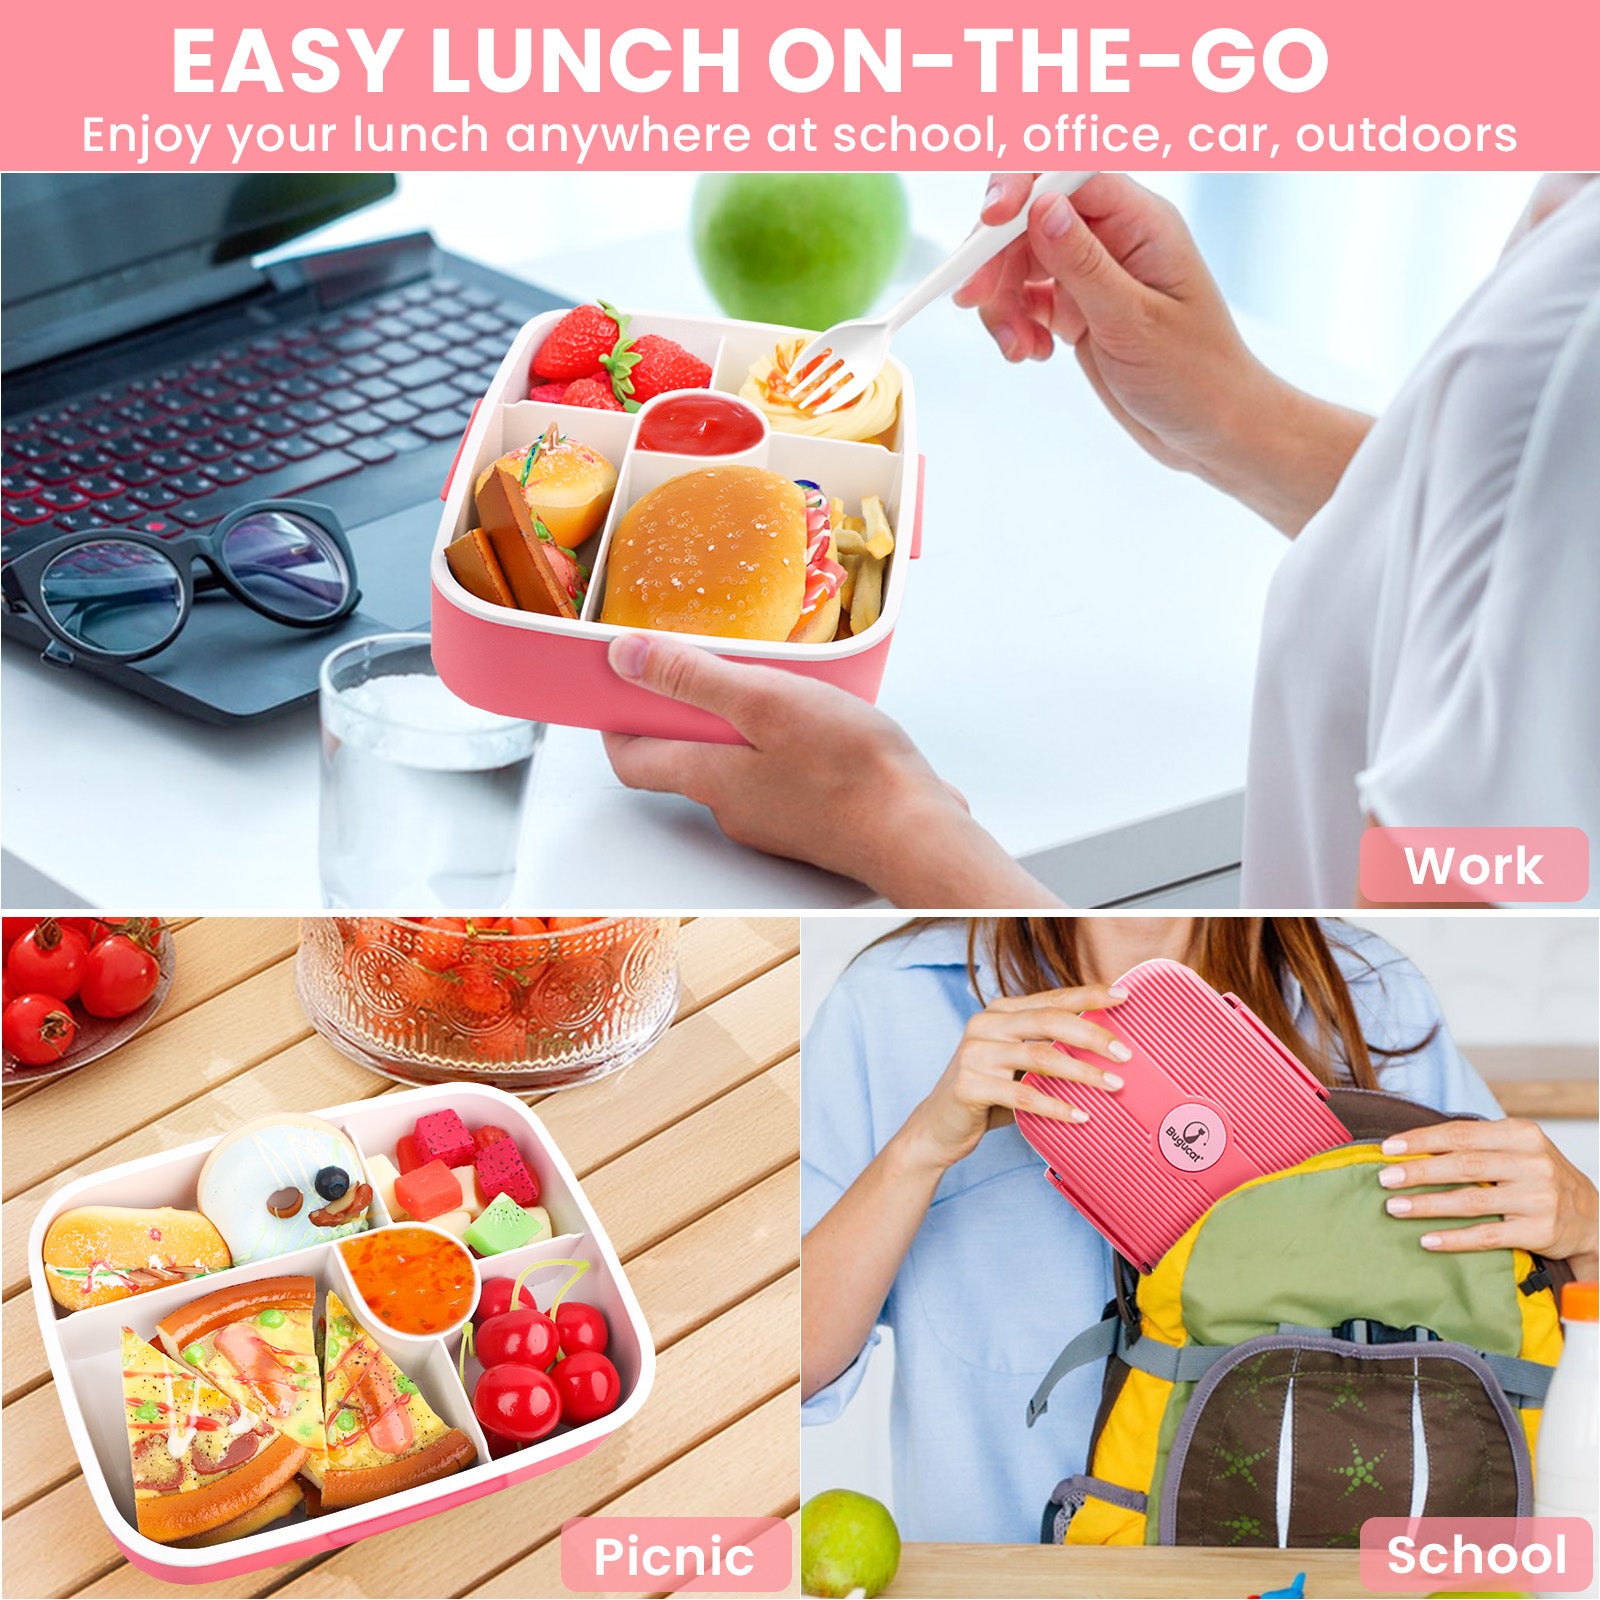 Bento Box Adult Lunch Box, Lunch Containers for Adults Men Women